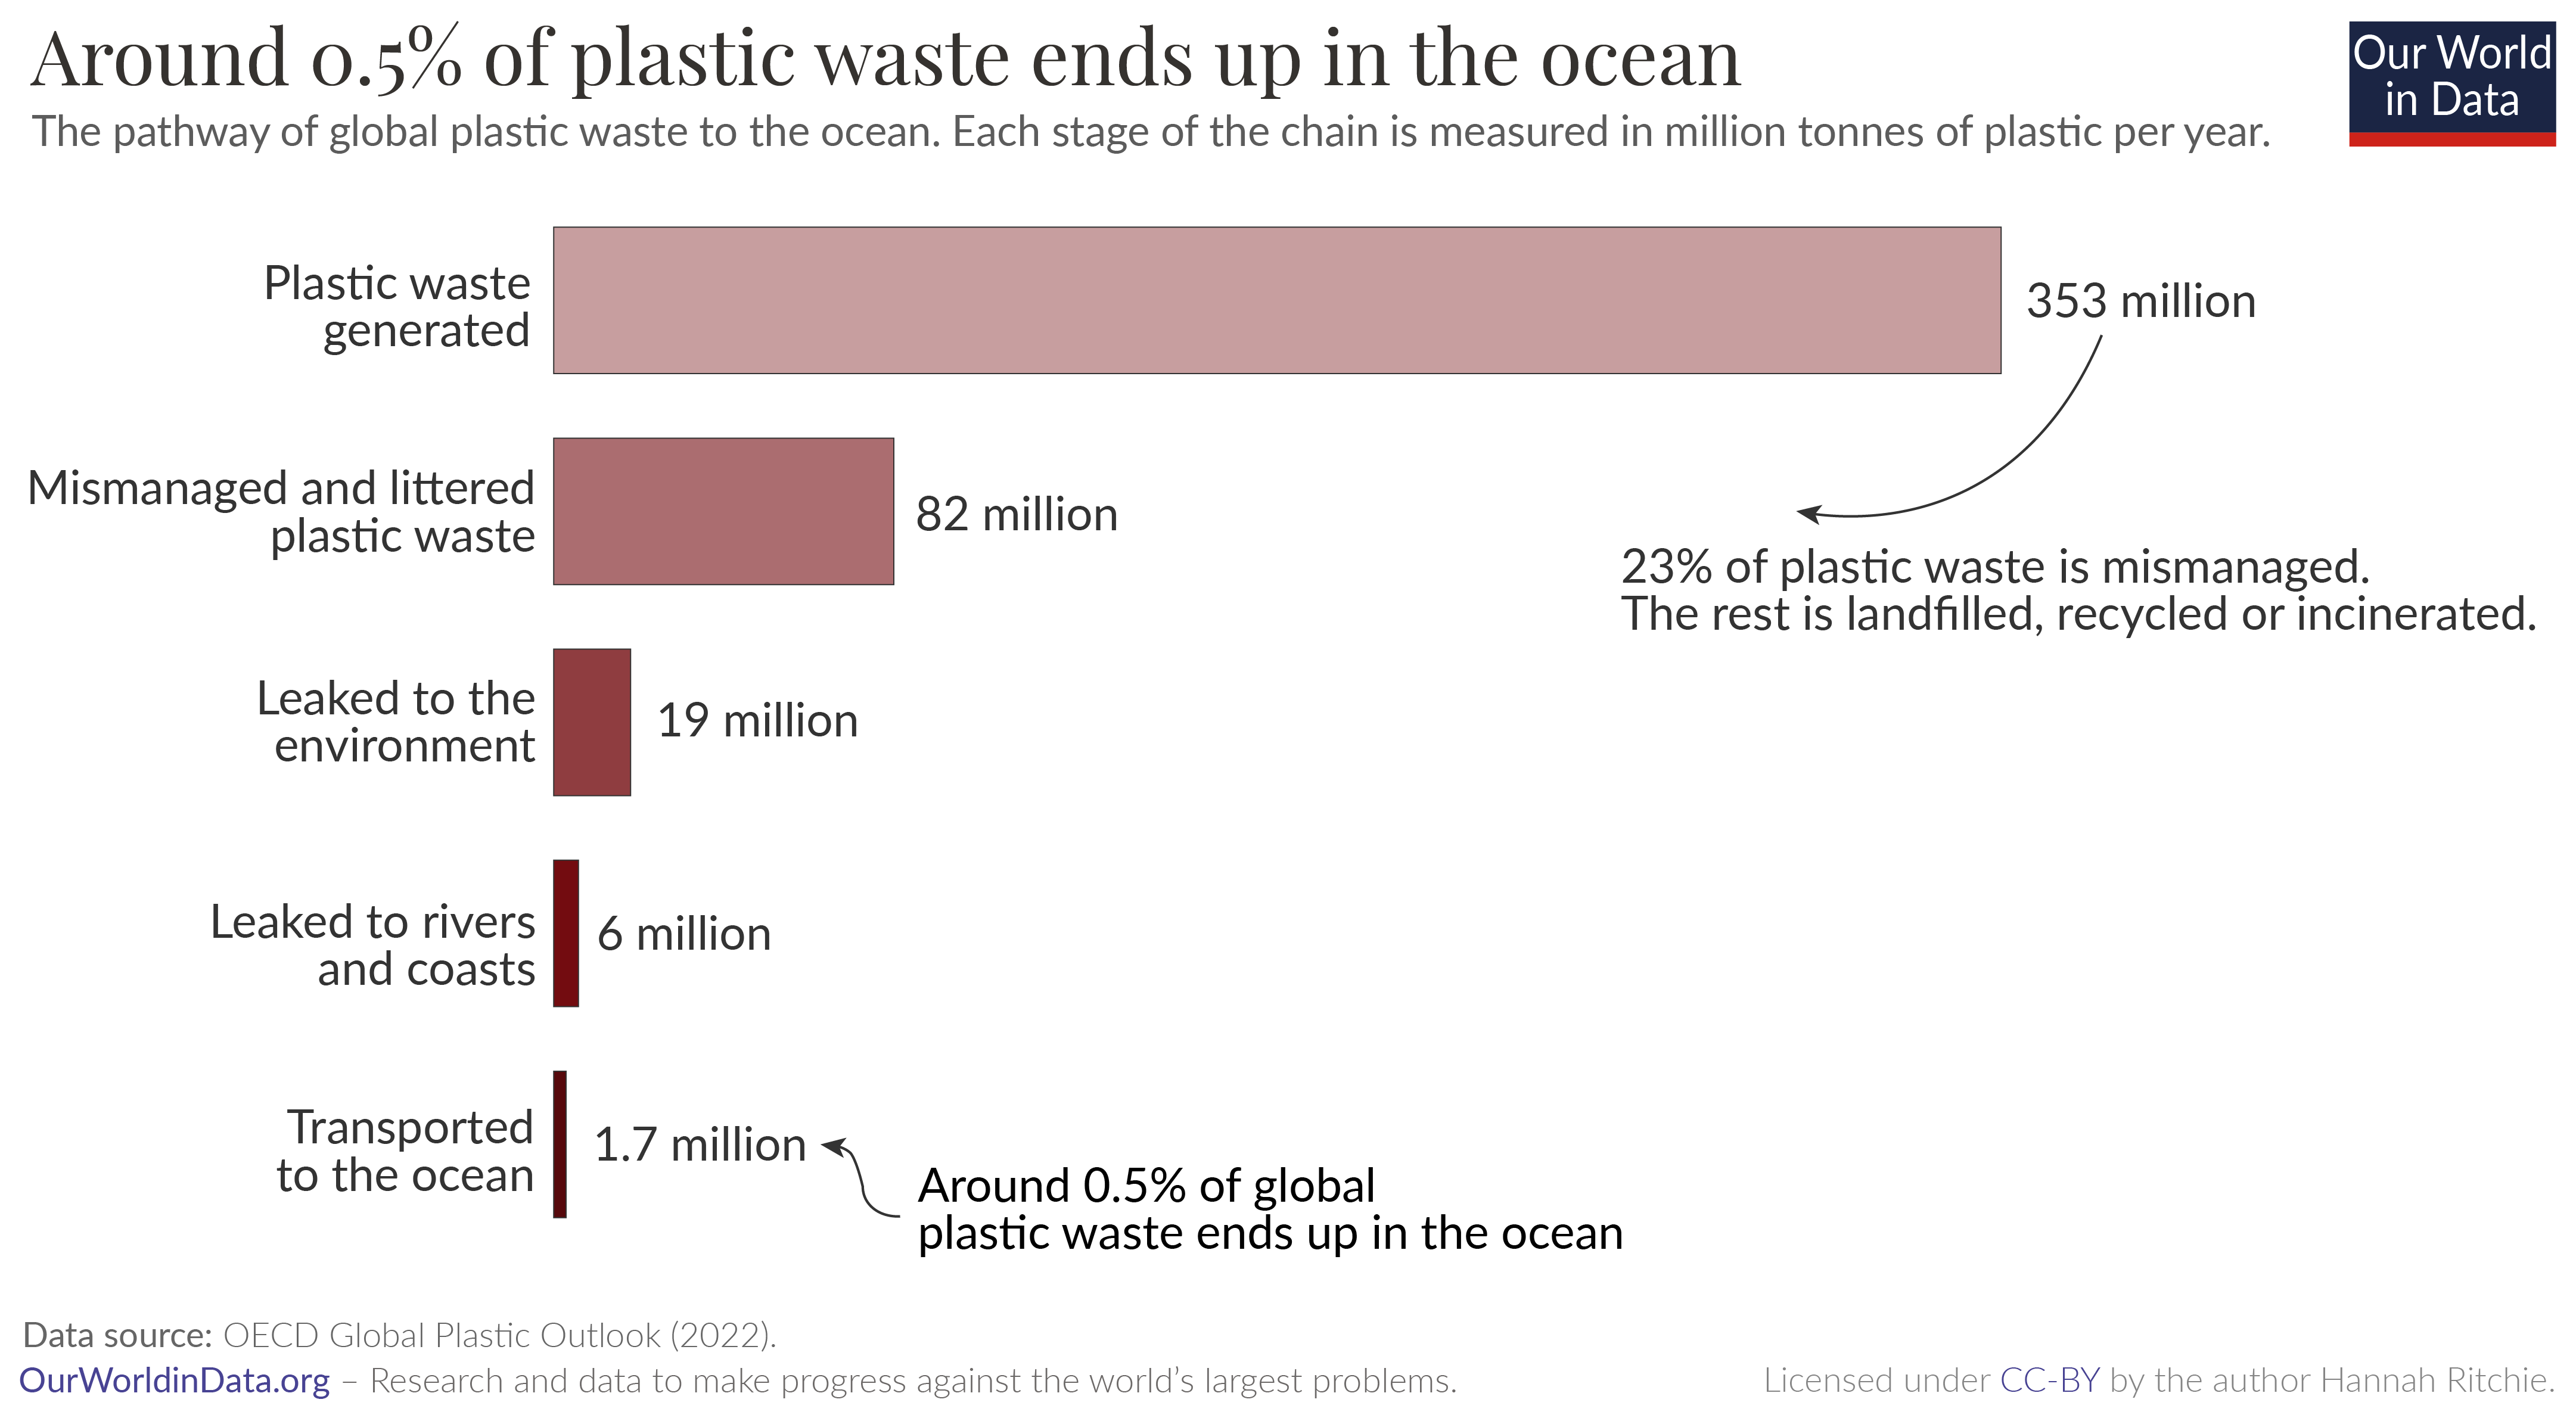 Bar chart showing the amount of plastic waste, how much is mismanaged, leaked to the environment, and transported to the ocean.

Around 350 million tonnes of plastic waste is generated, but just 1.7 million tonnes is transported to the ocean. That's 0.5%.